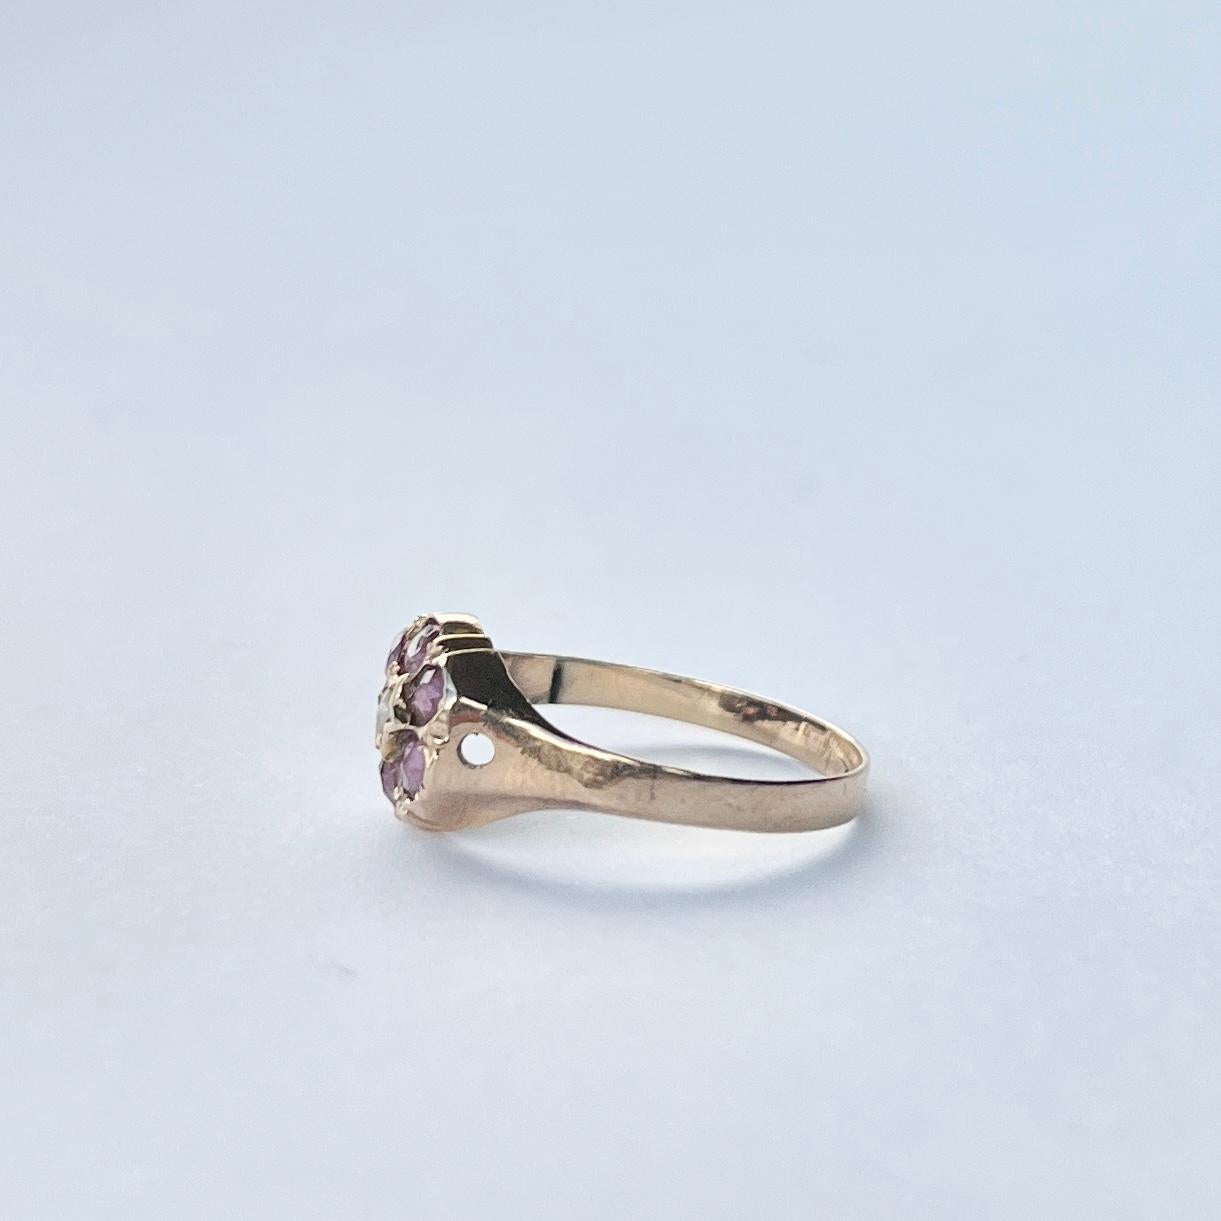 Antique 9 Carat Gold Amethyst and Pearl Cluster Ring In Fair Condition For Sale In Chipping Campden, GB